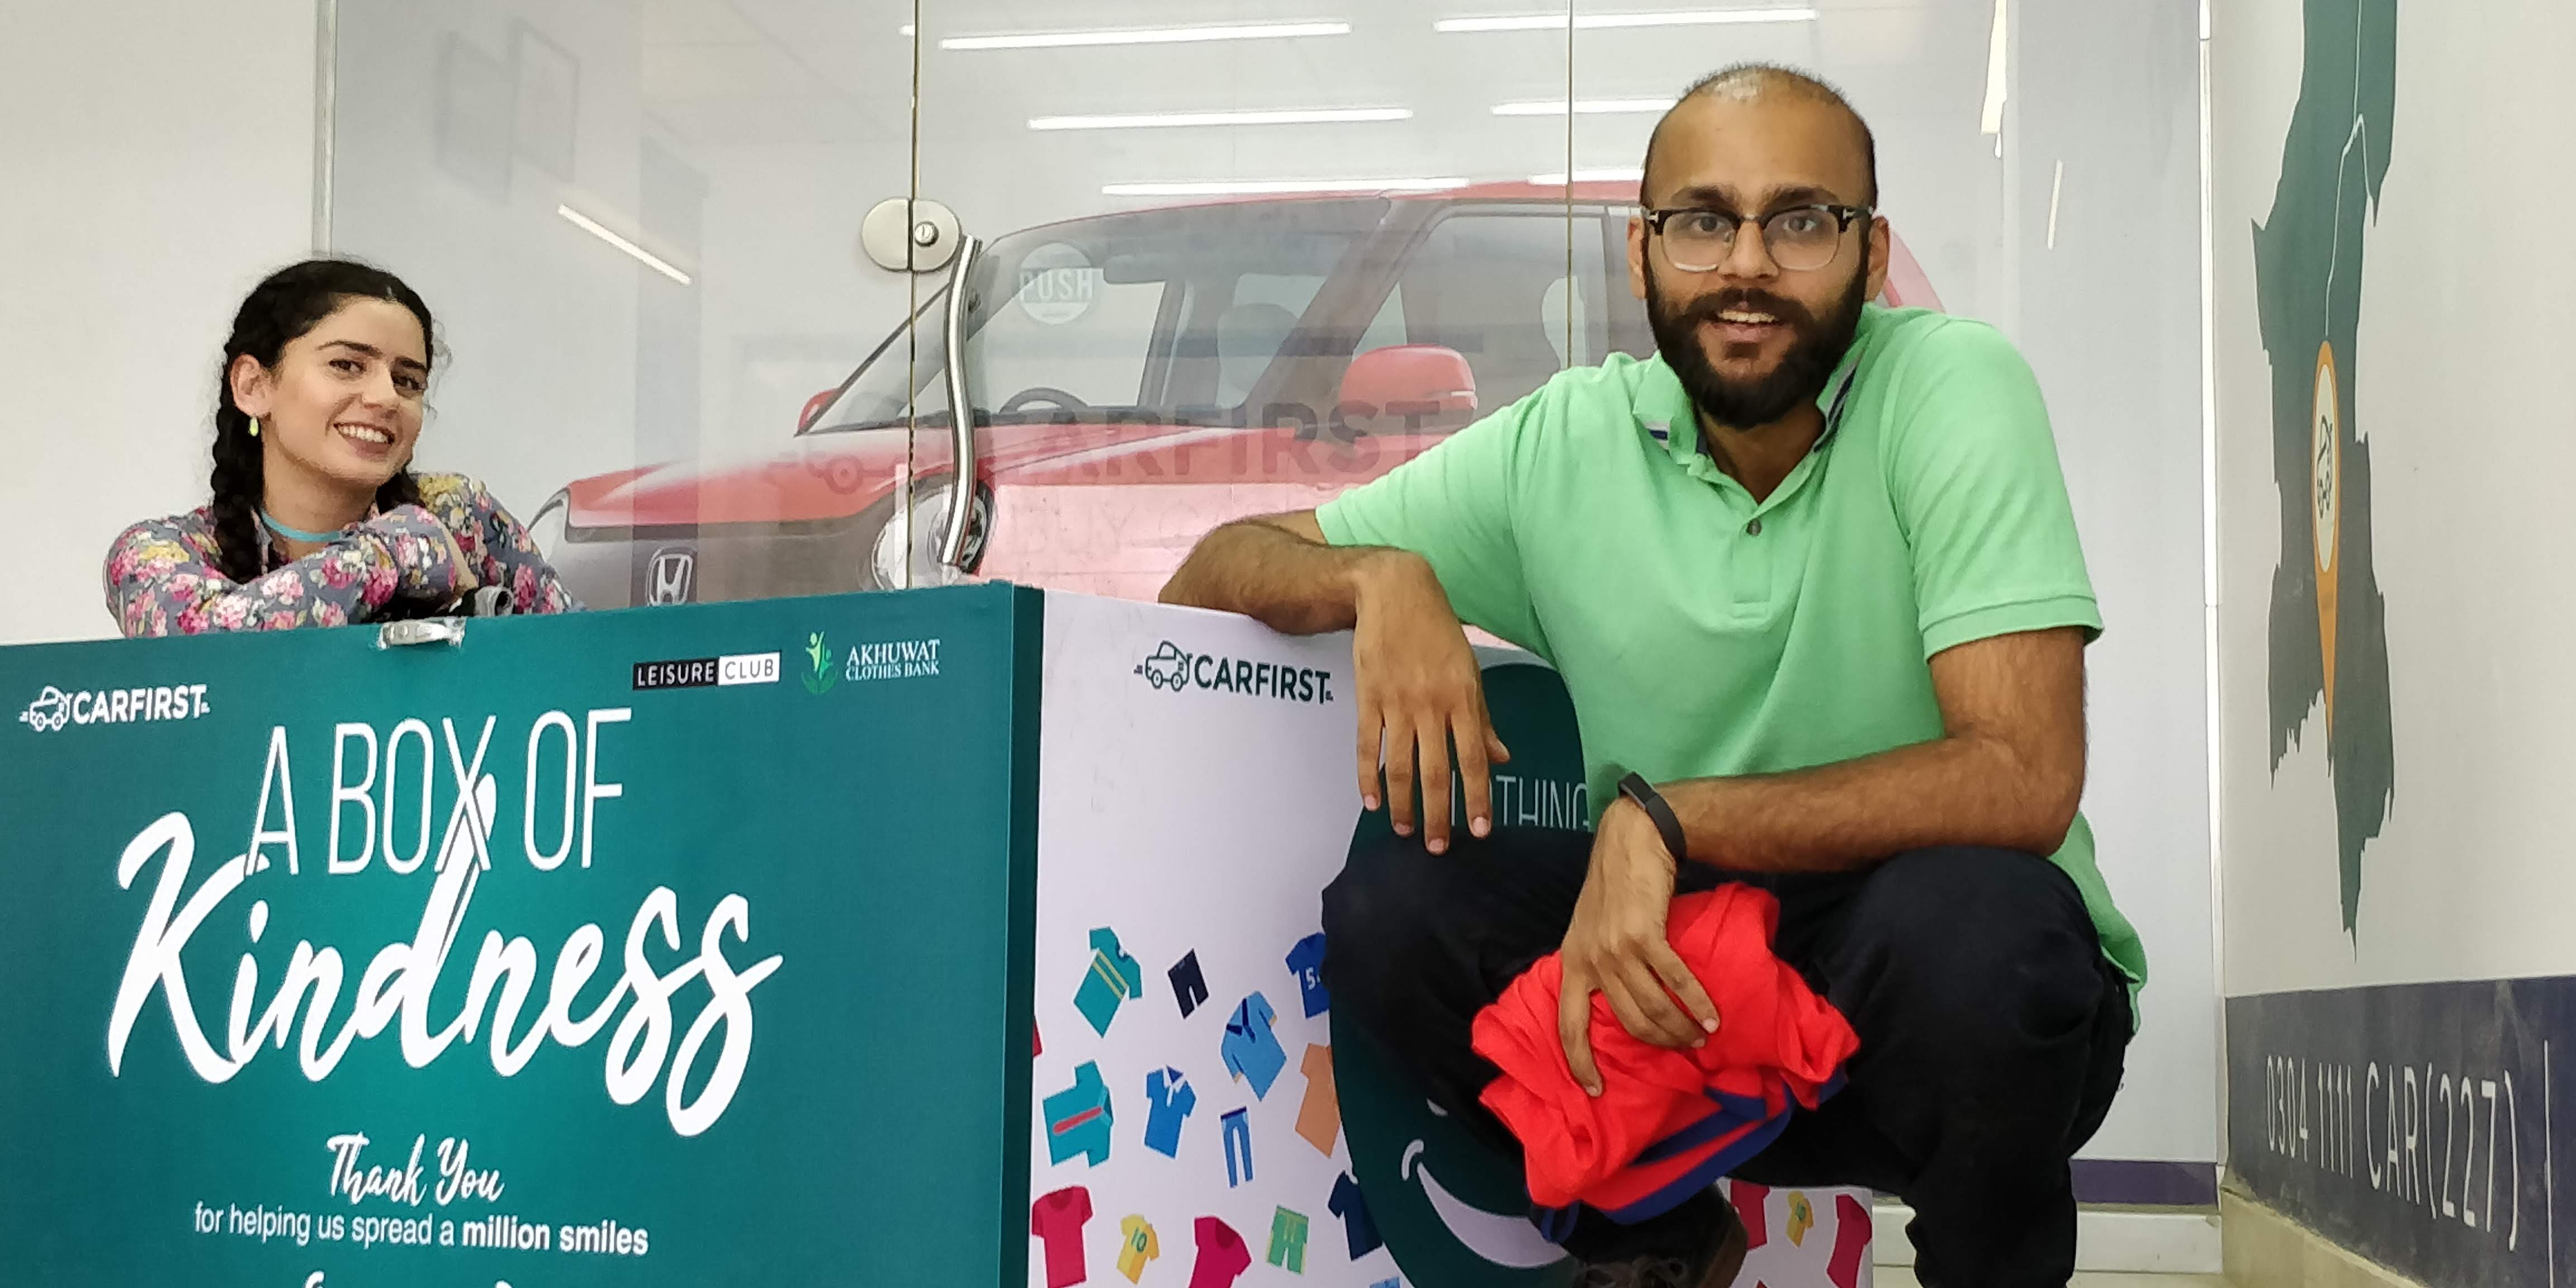 CarFirst, Leisure Club & Akhuwat Come Together to Clothe a Million Smiles